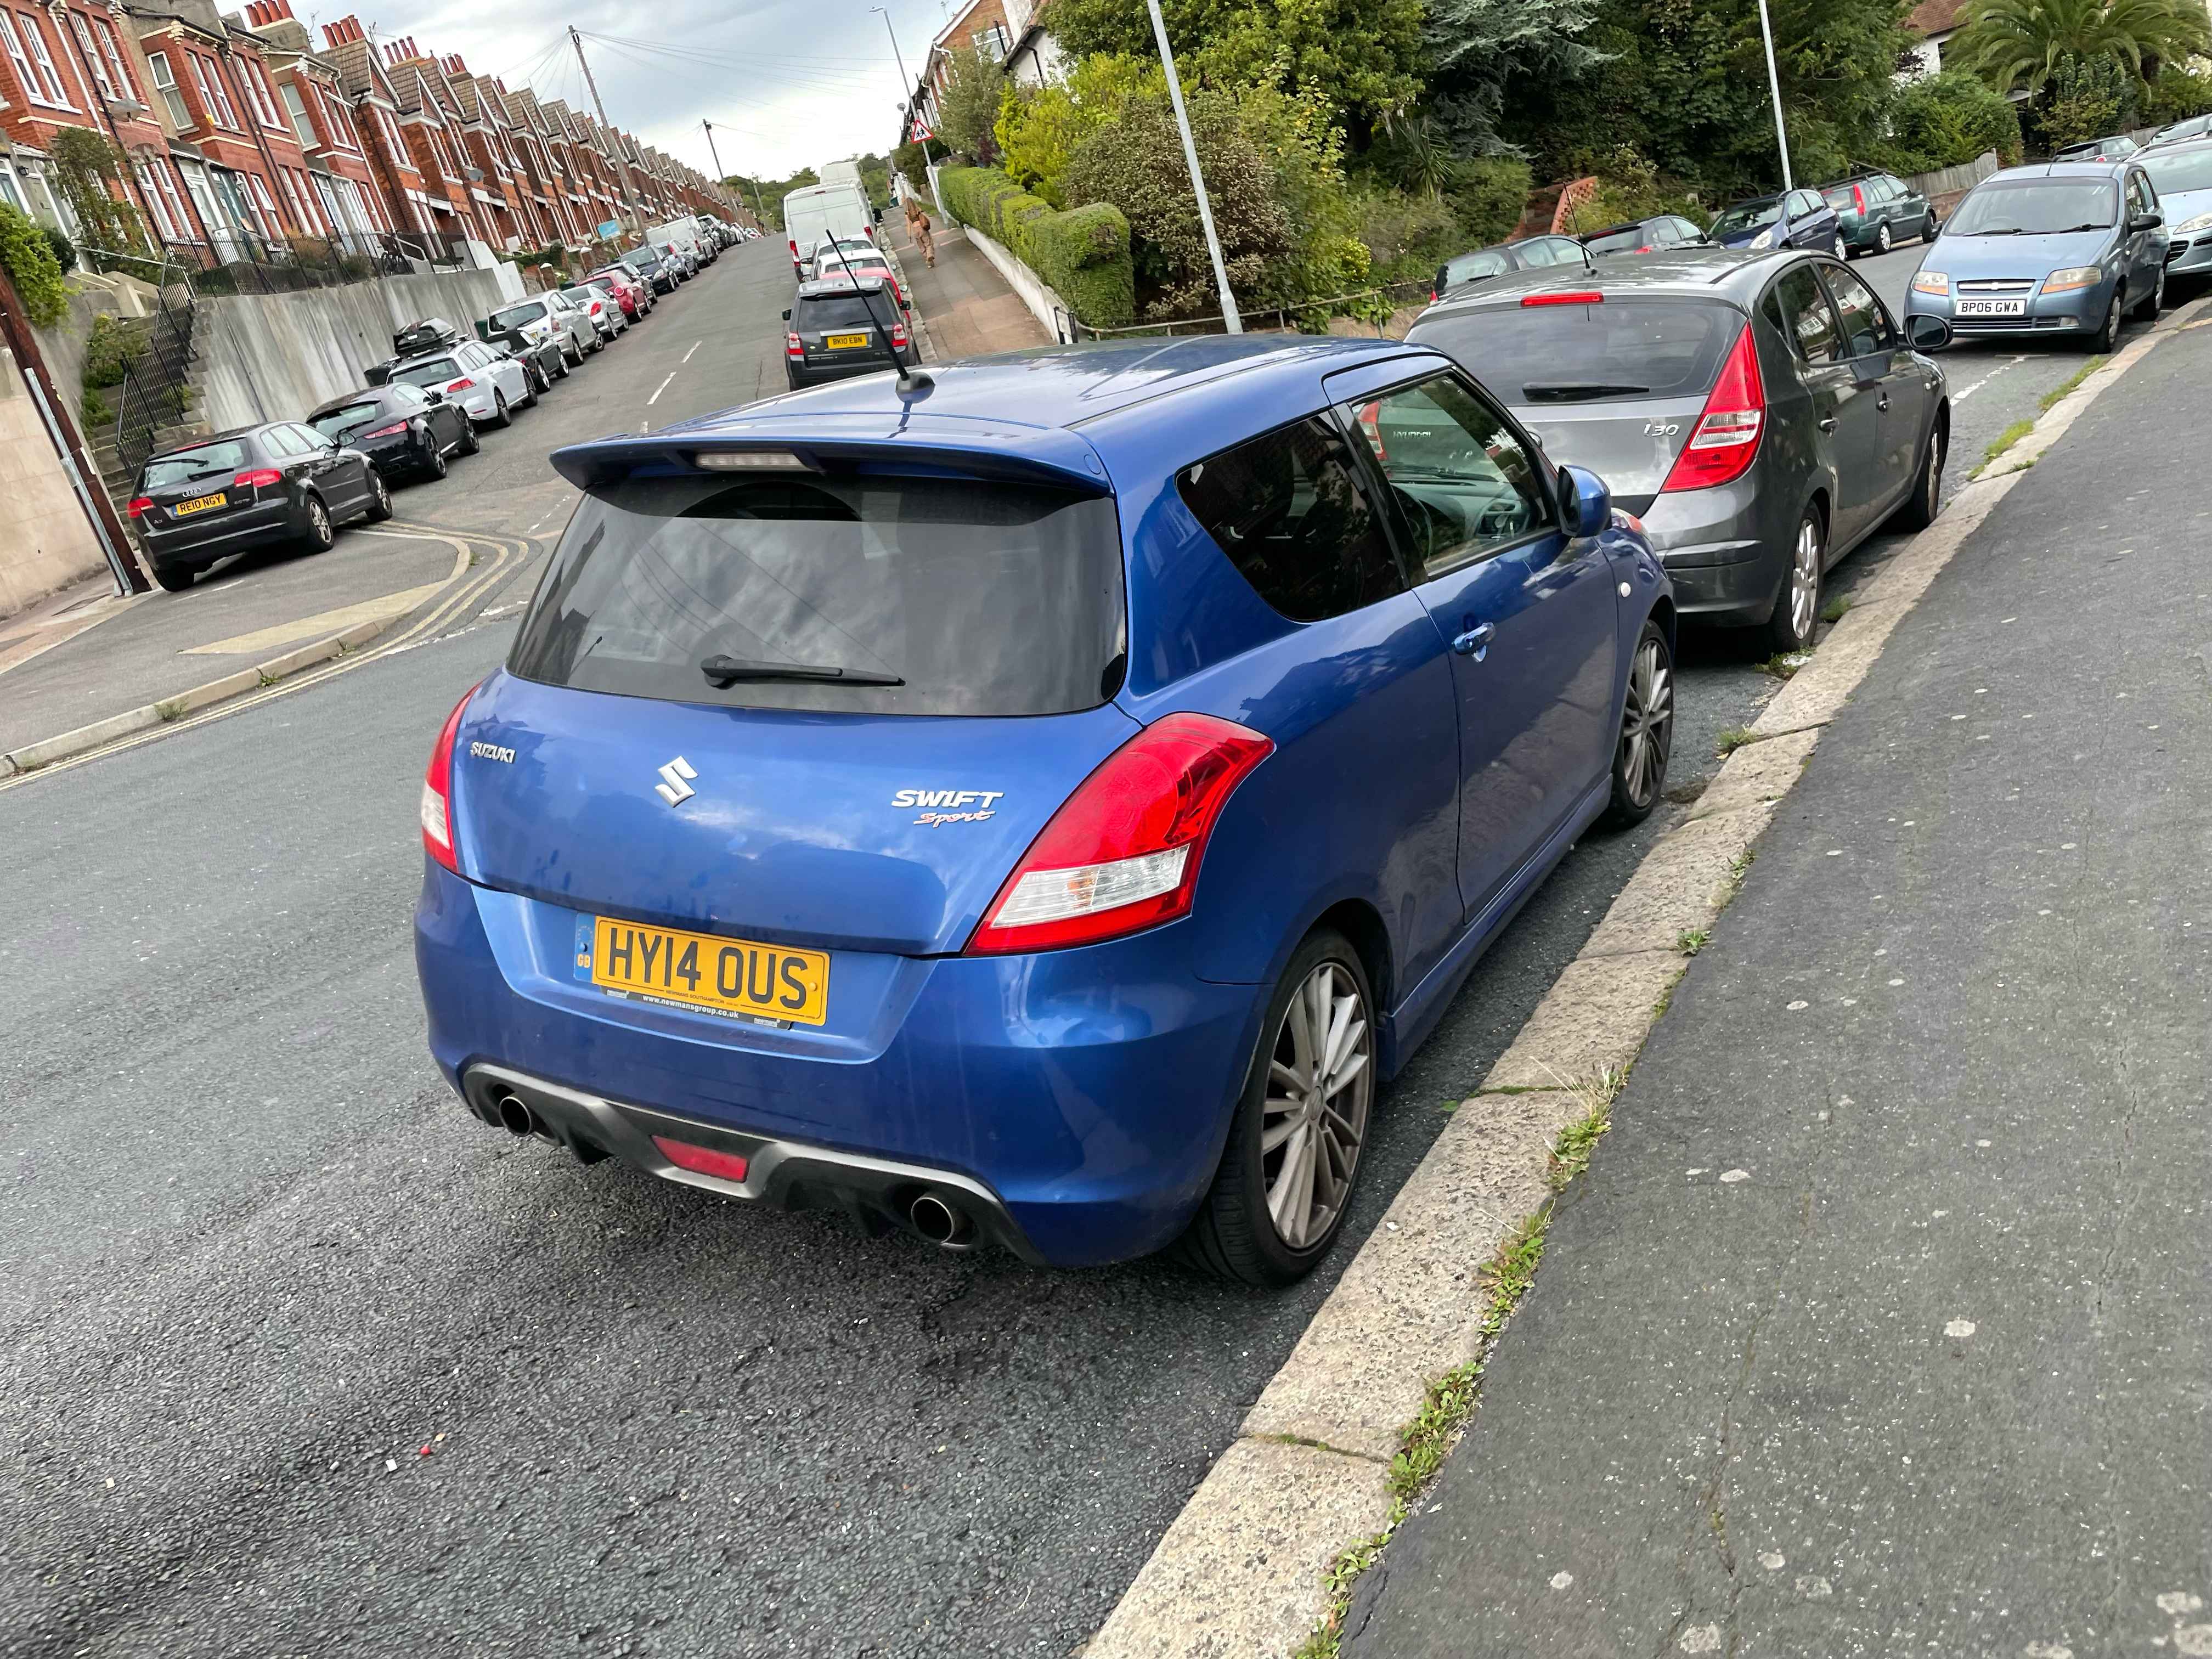 Photograph of HY14 OUS - a Blue Suzuki Swift parked in Hollingdean by a non-resident. The first of four photographs supplied by the residents of Hollingdean.